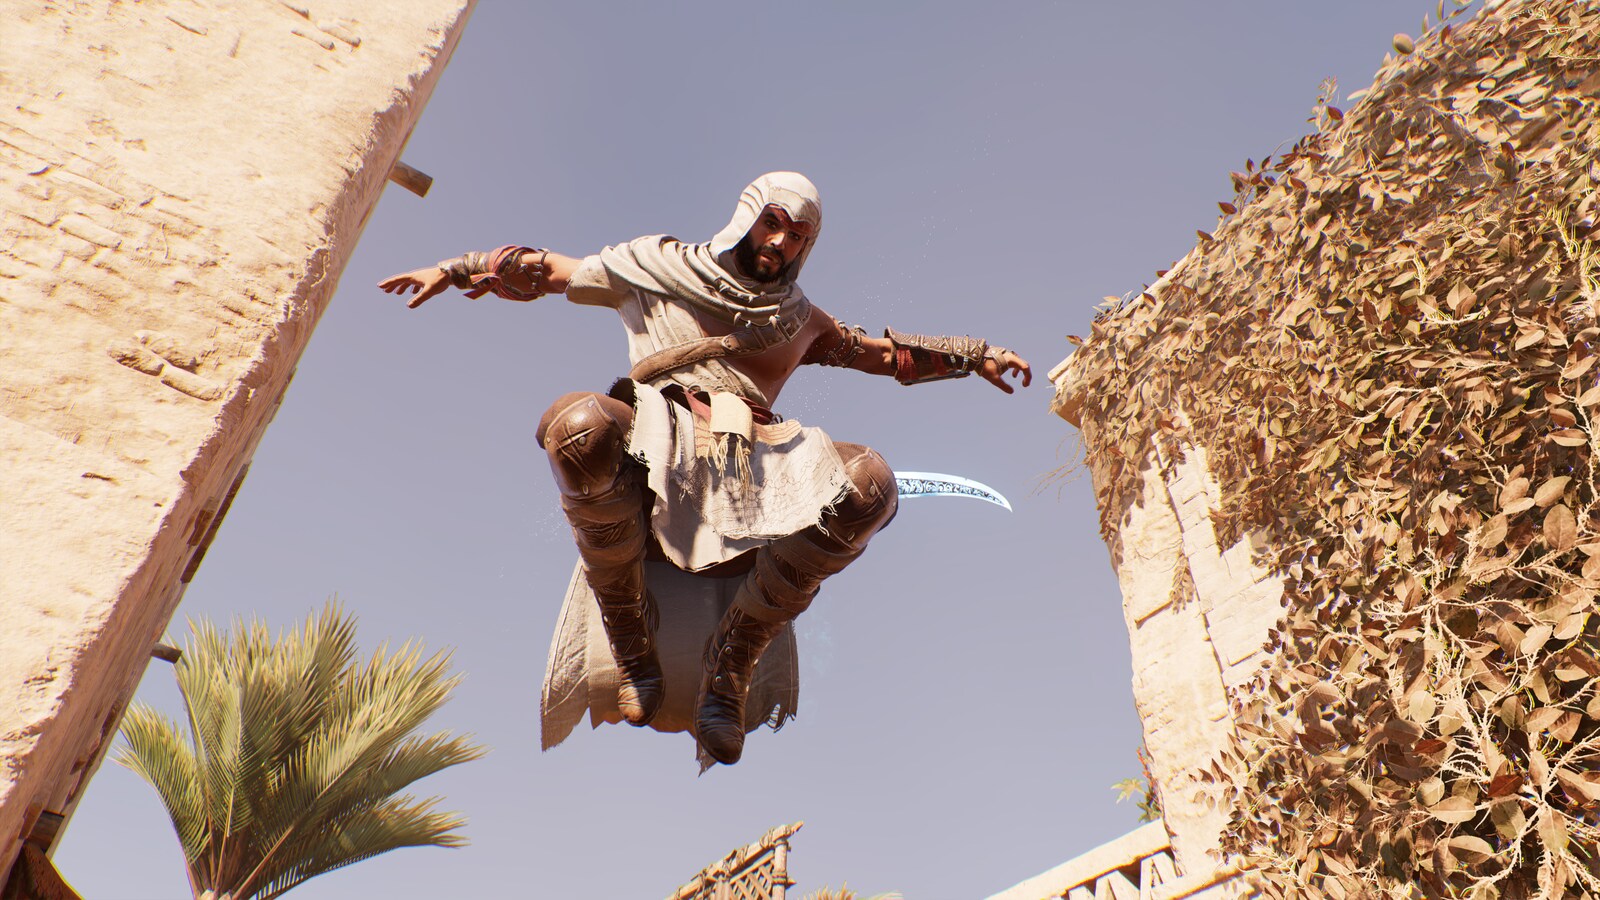 Assassin's Creed Mirage review: sneaking behind the times